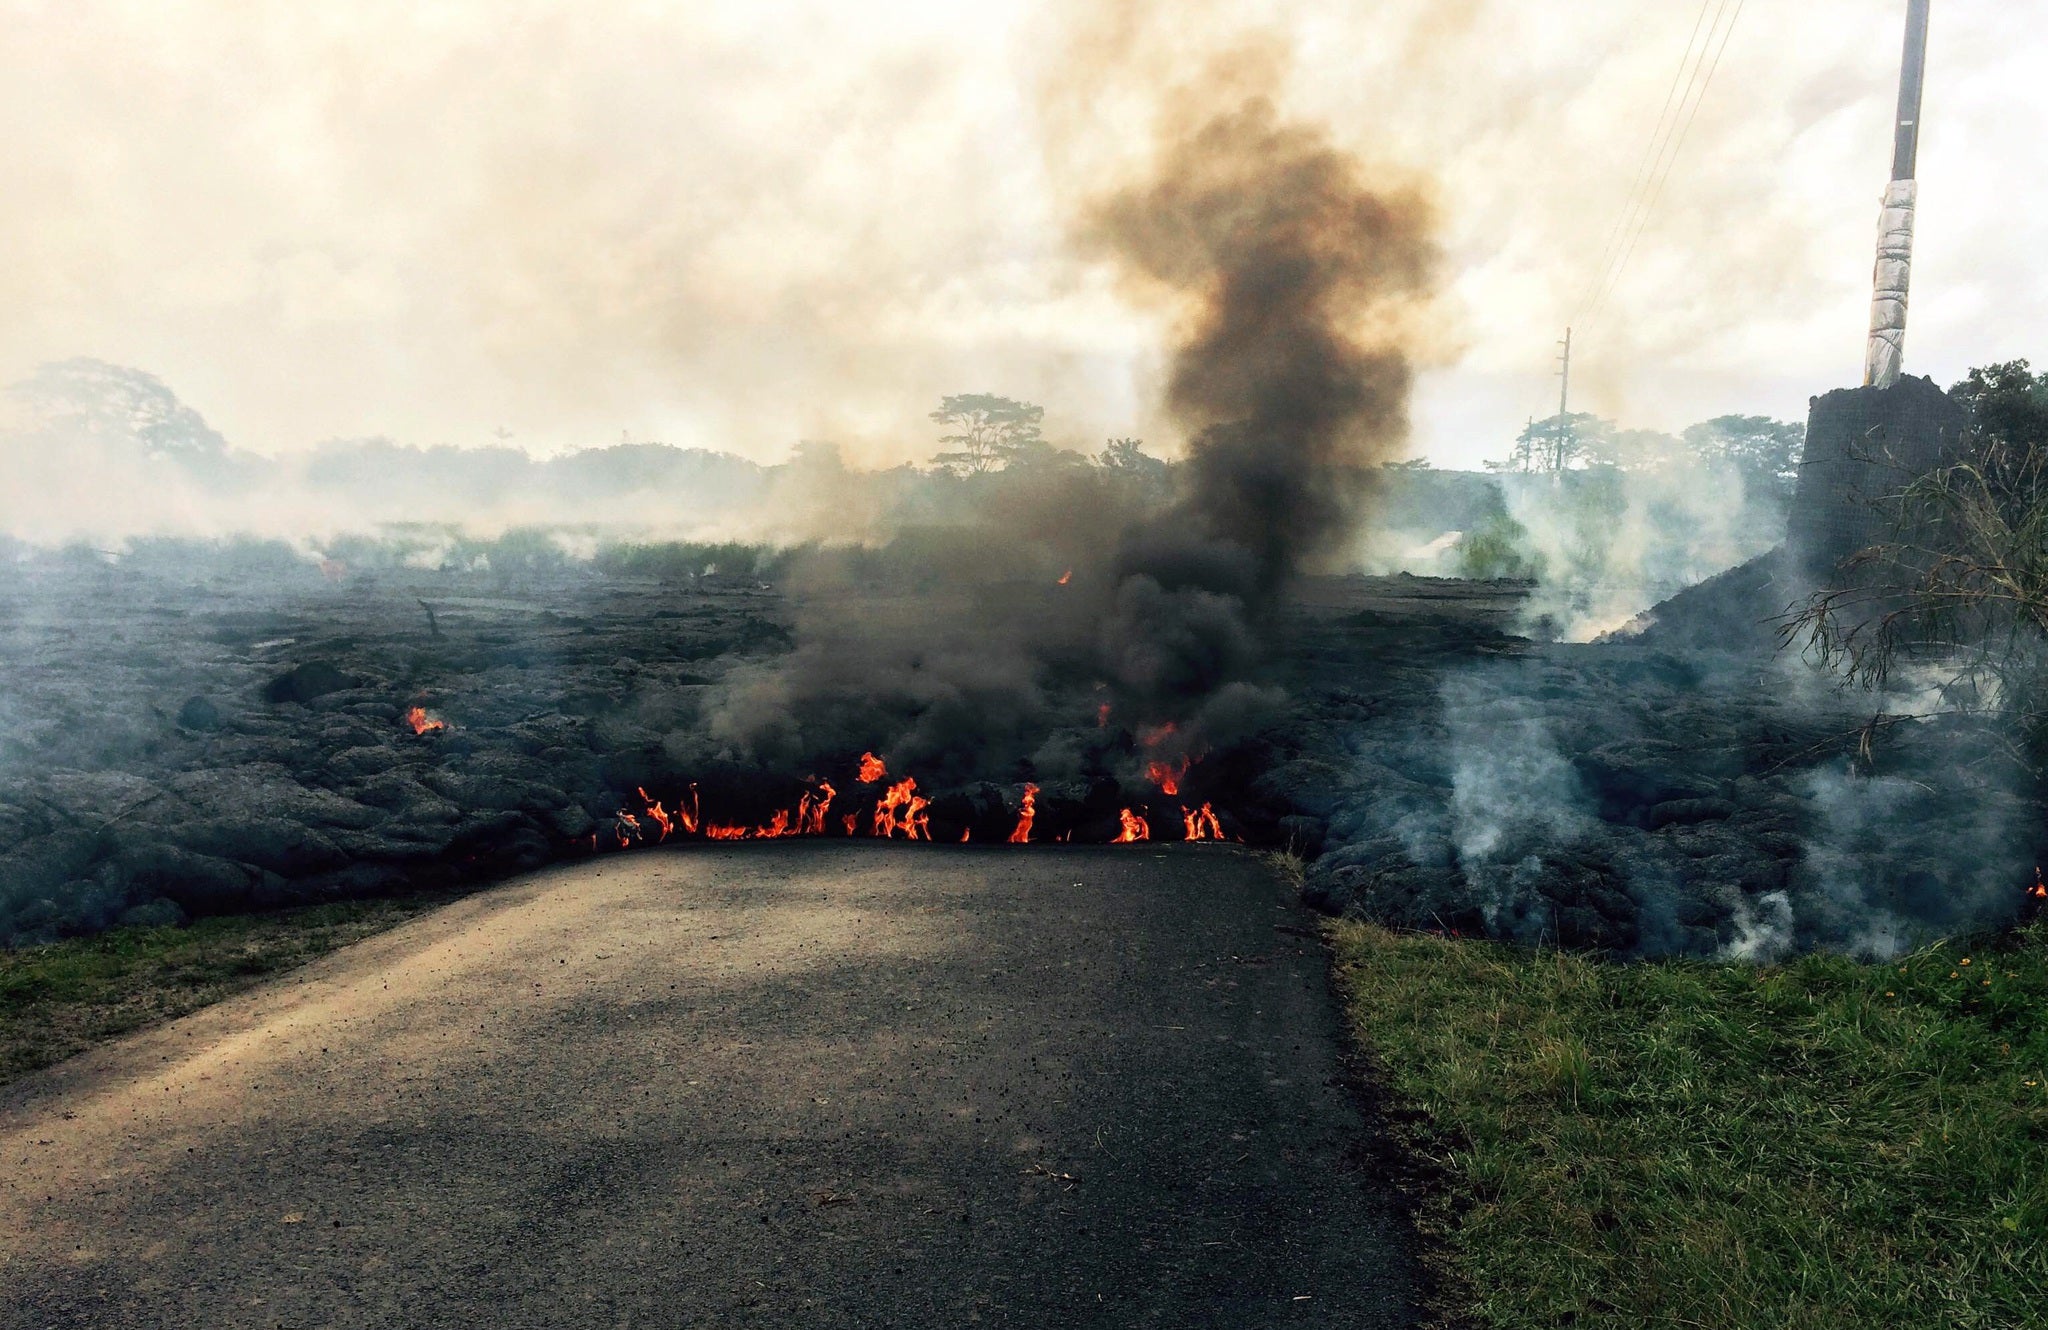 The stretch of lava from the Kilauea volcano in Hawaii, which measures up to 230 ft wide